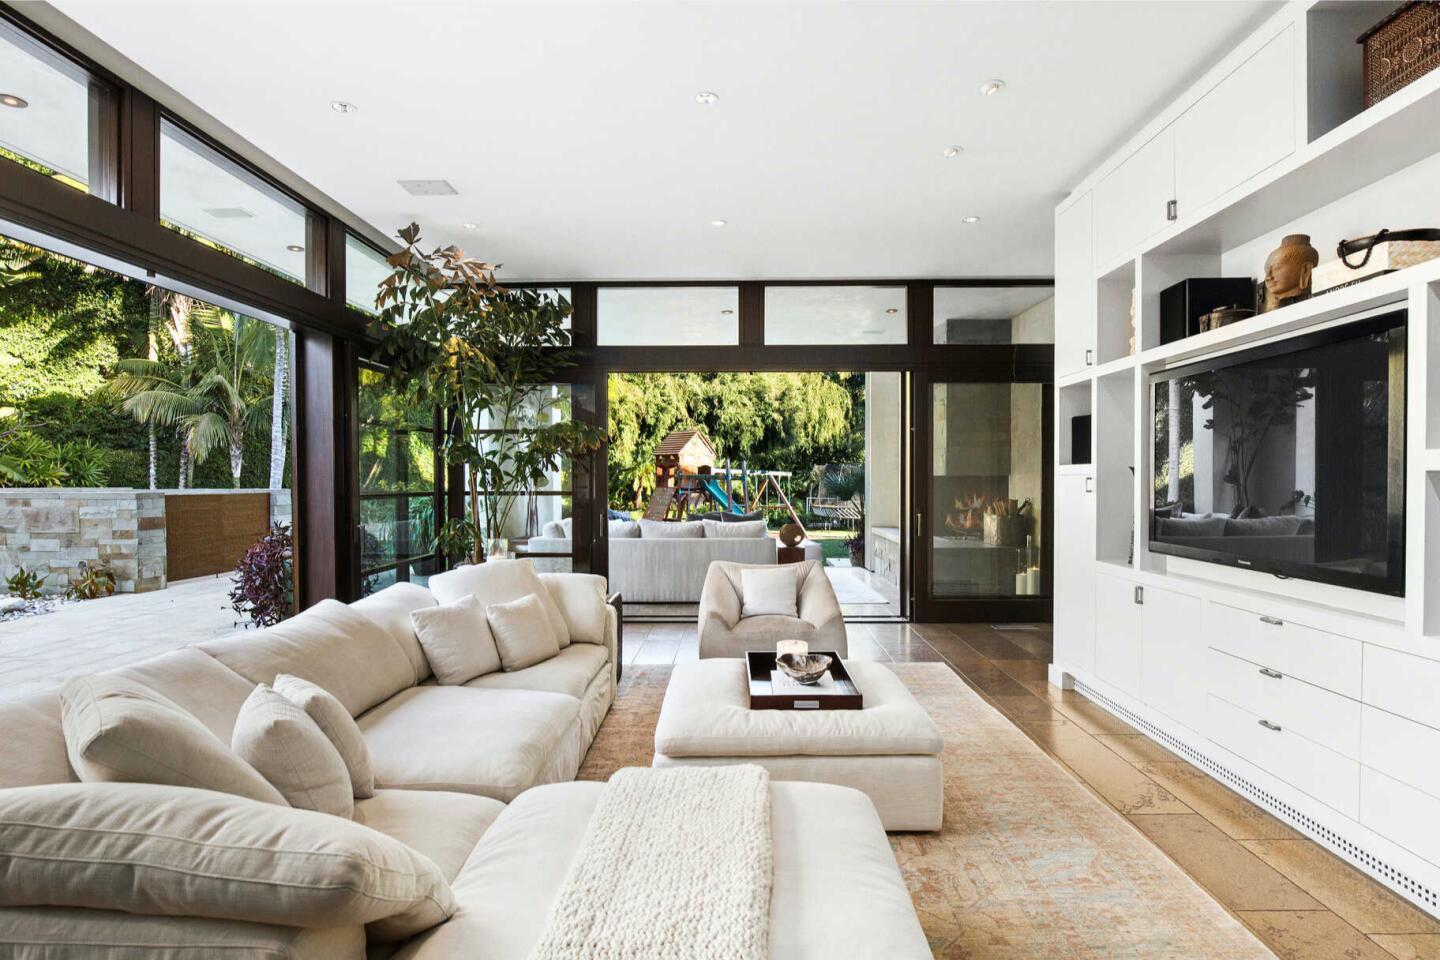 The furnished family room with a built-in TV and big windows looking out on trees.